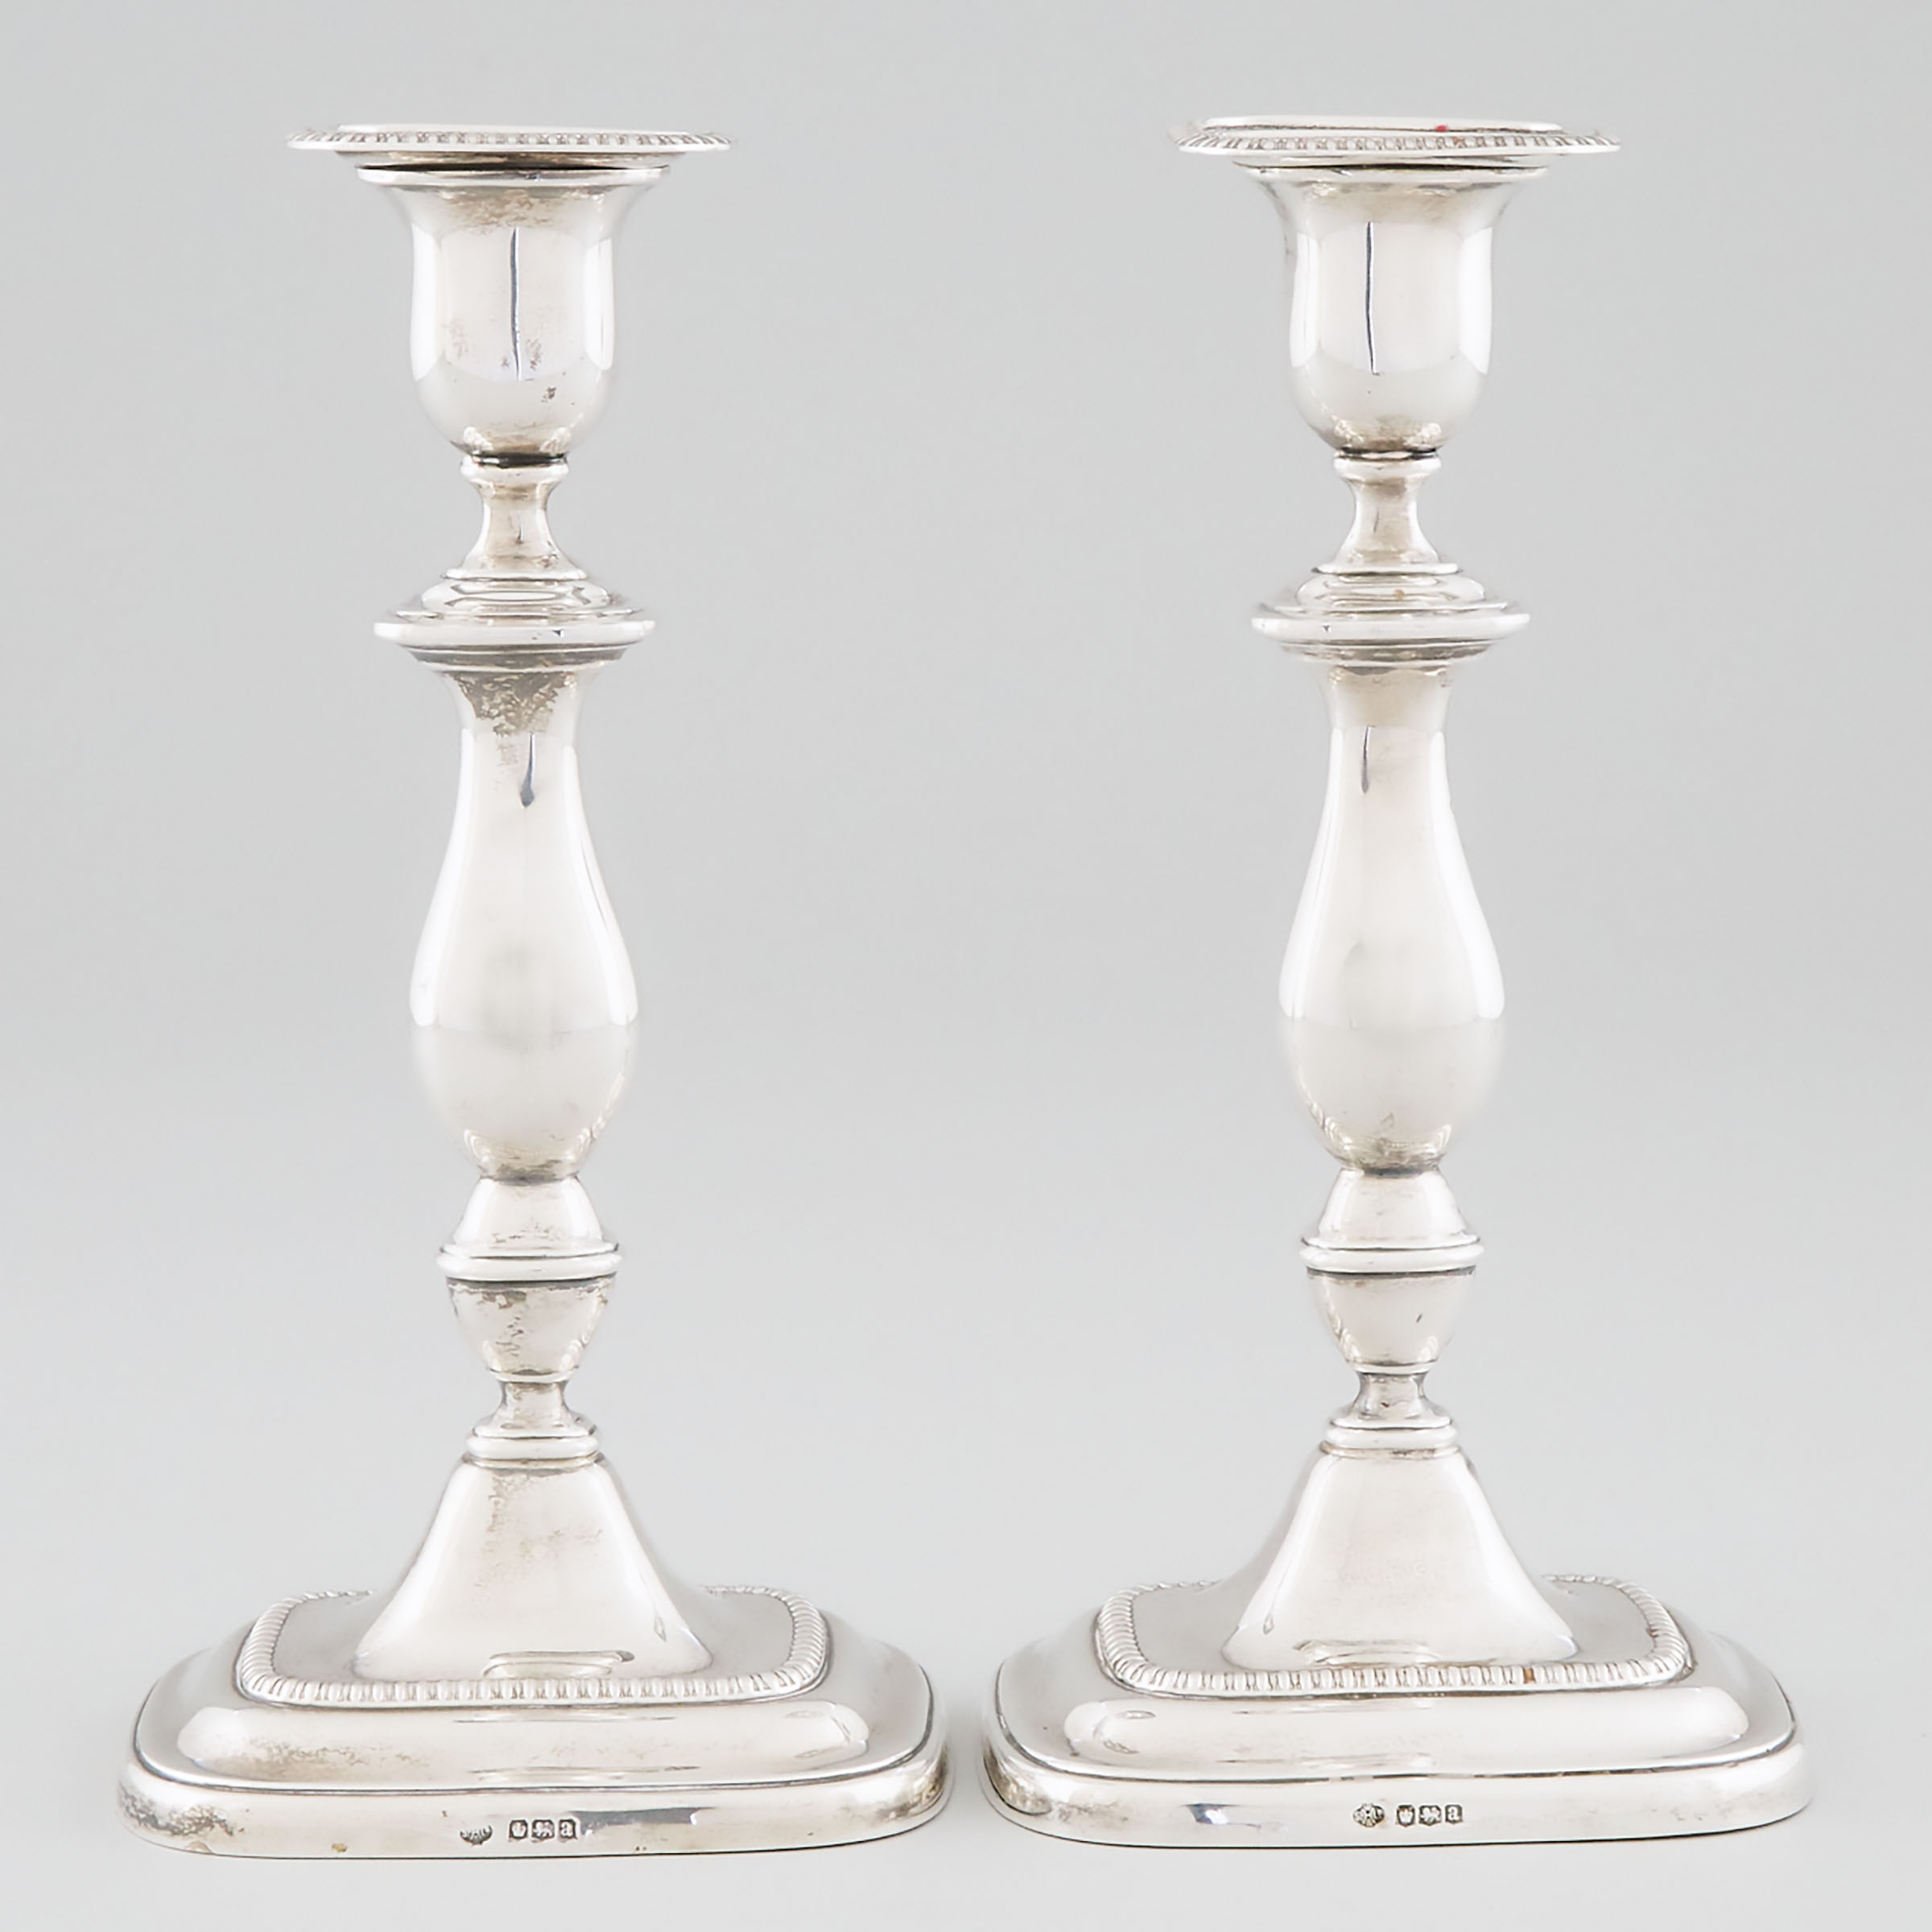 Pair of English Silver Table Candlesticks  3ac5d3